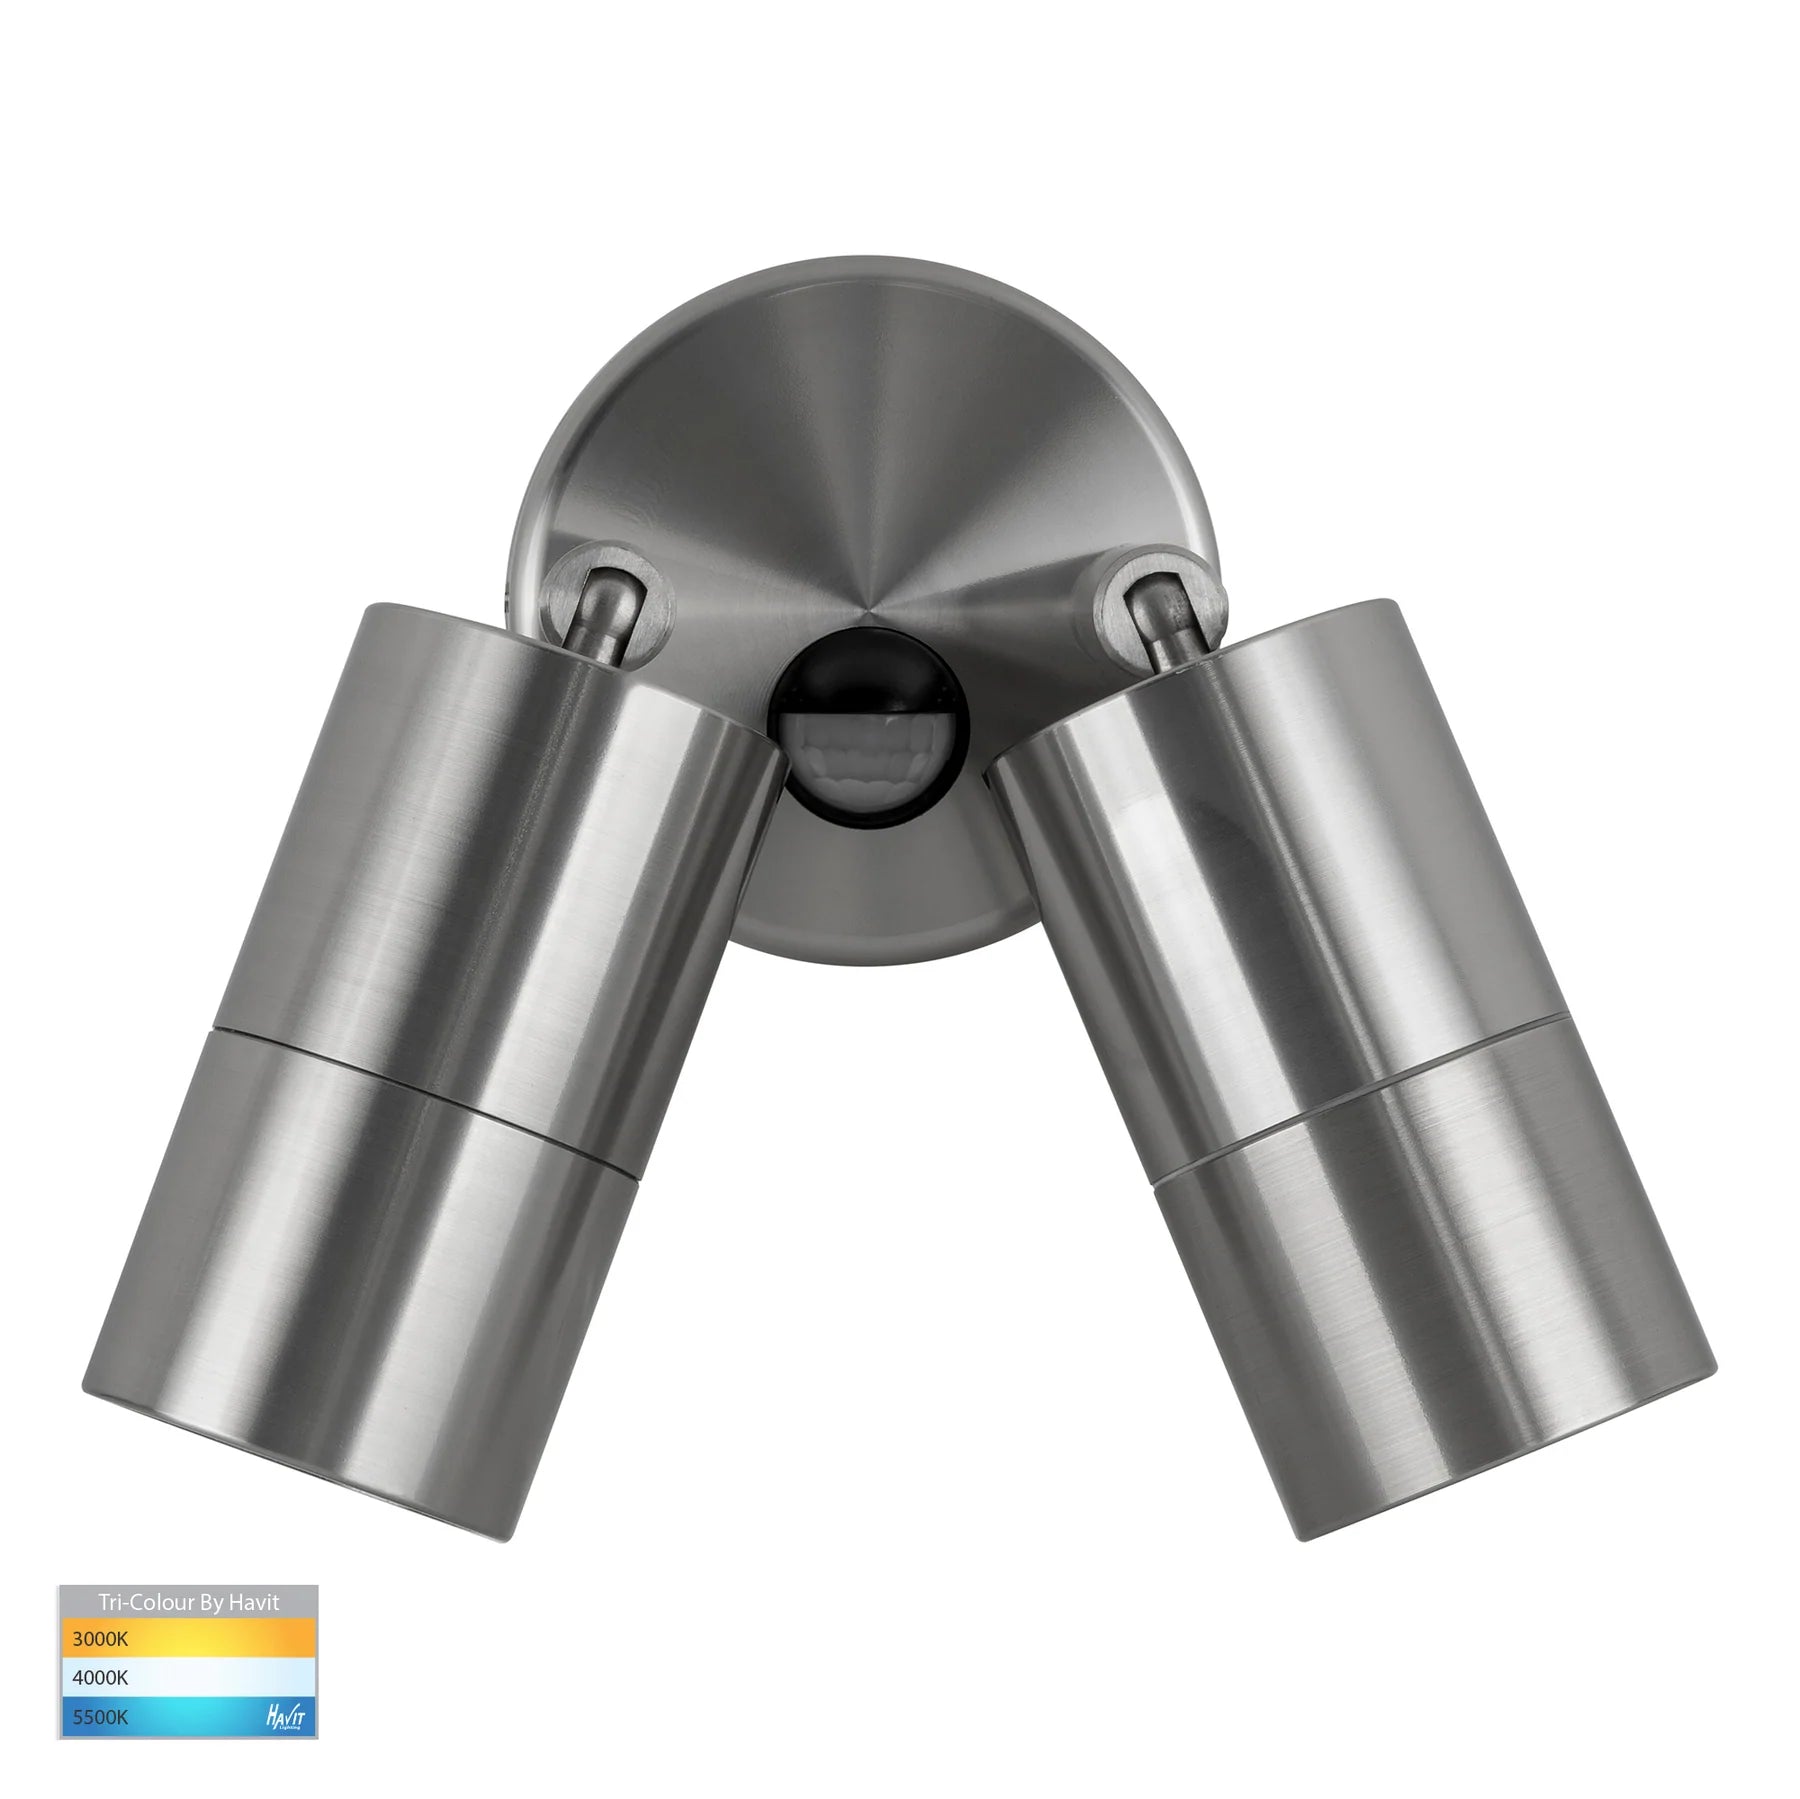 Tivah 316 Stainless Steel TRI Colour Double Adjustable Spot Lights with Sensor - HV1306T-PIR